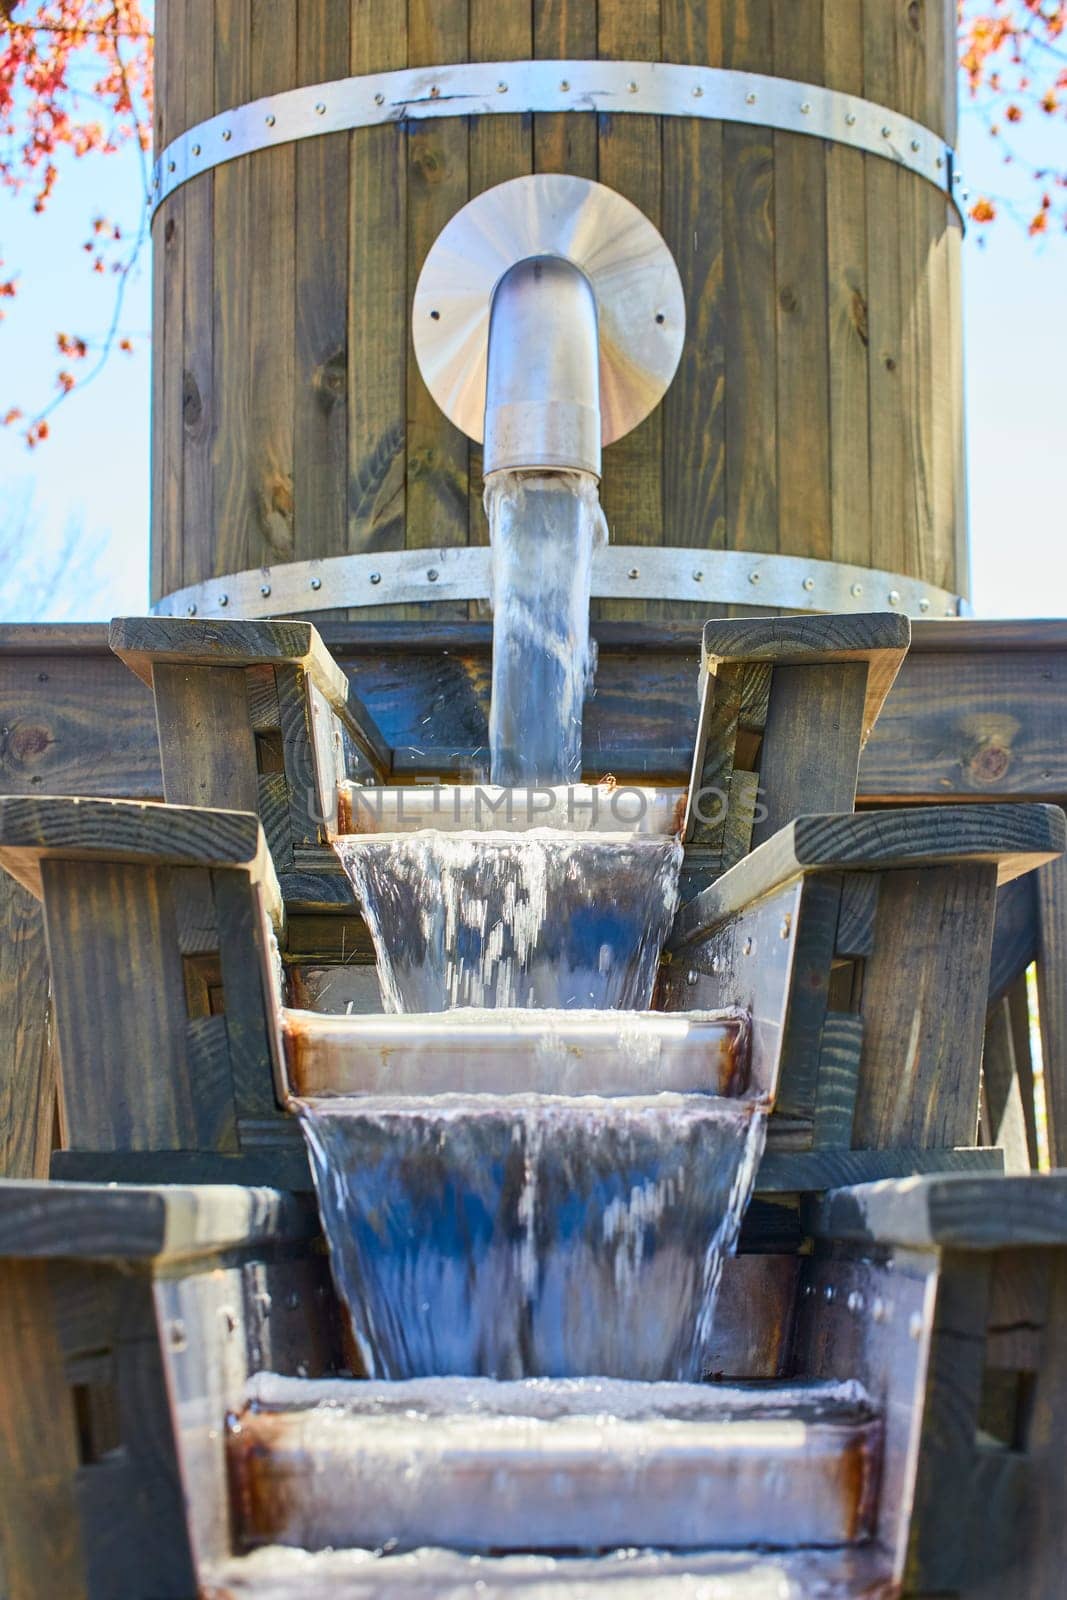 Rustic wooden water feature at Fort Wayne, Indiana flows gently in a serene garden setting.